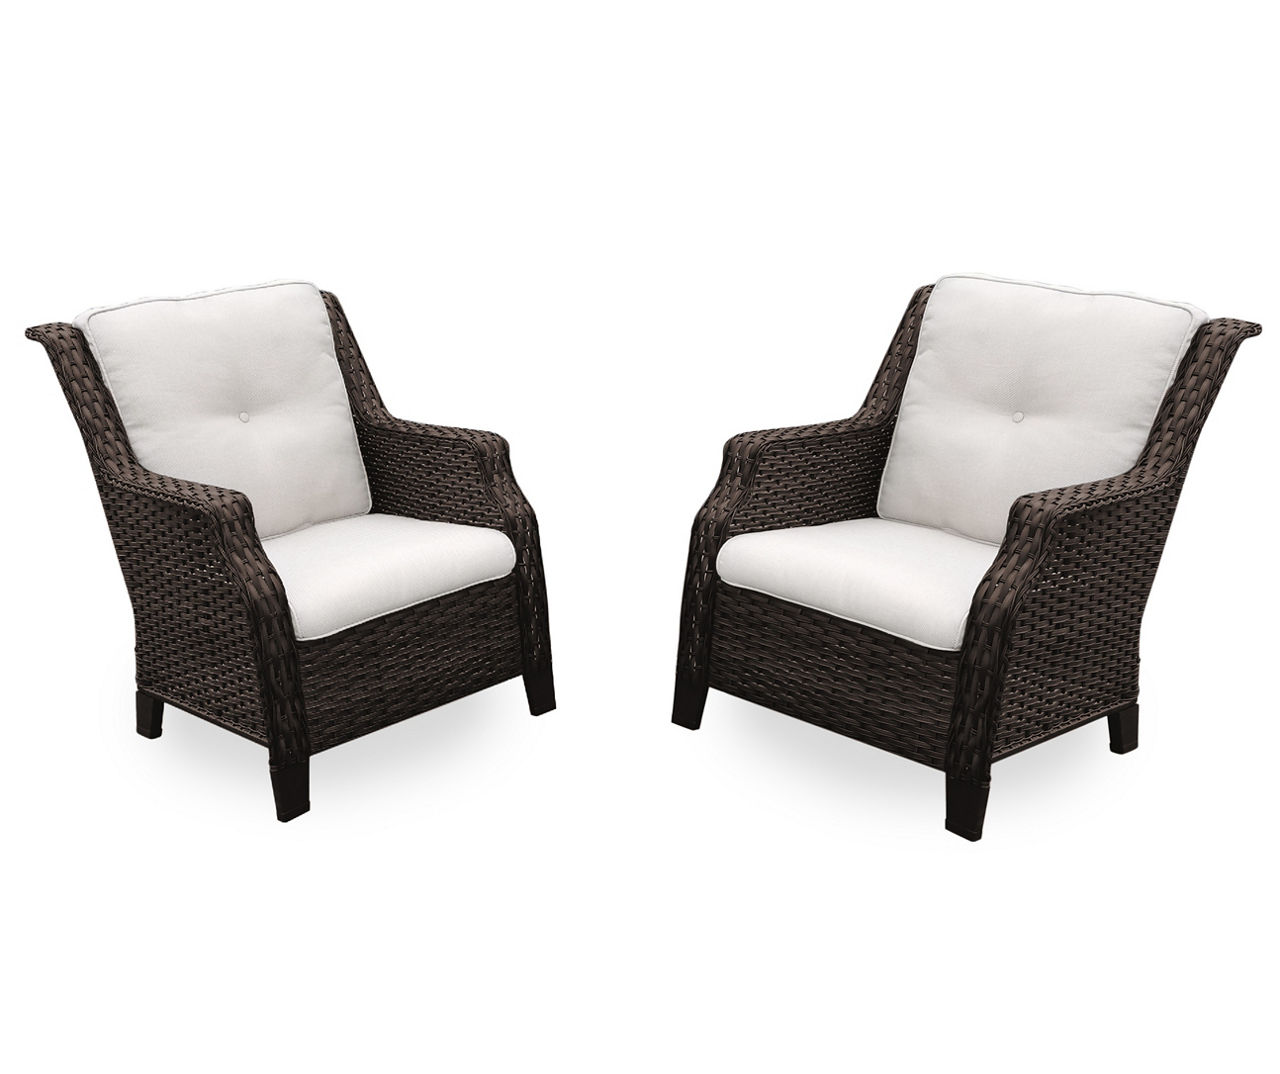 Rockbridge Beige All-Weather Wicker Cushioned Patio Chairs, 2-Pack